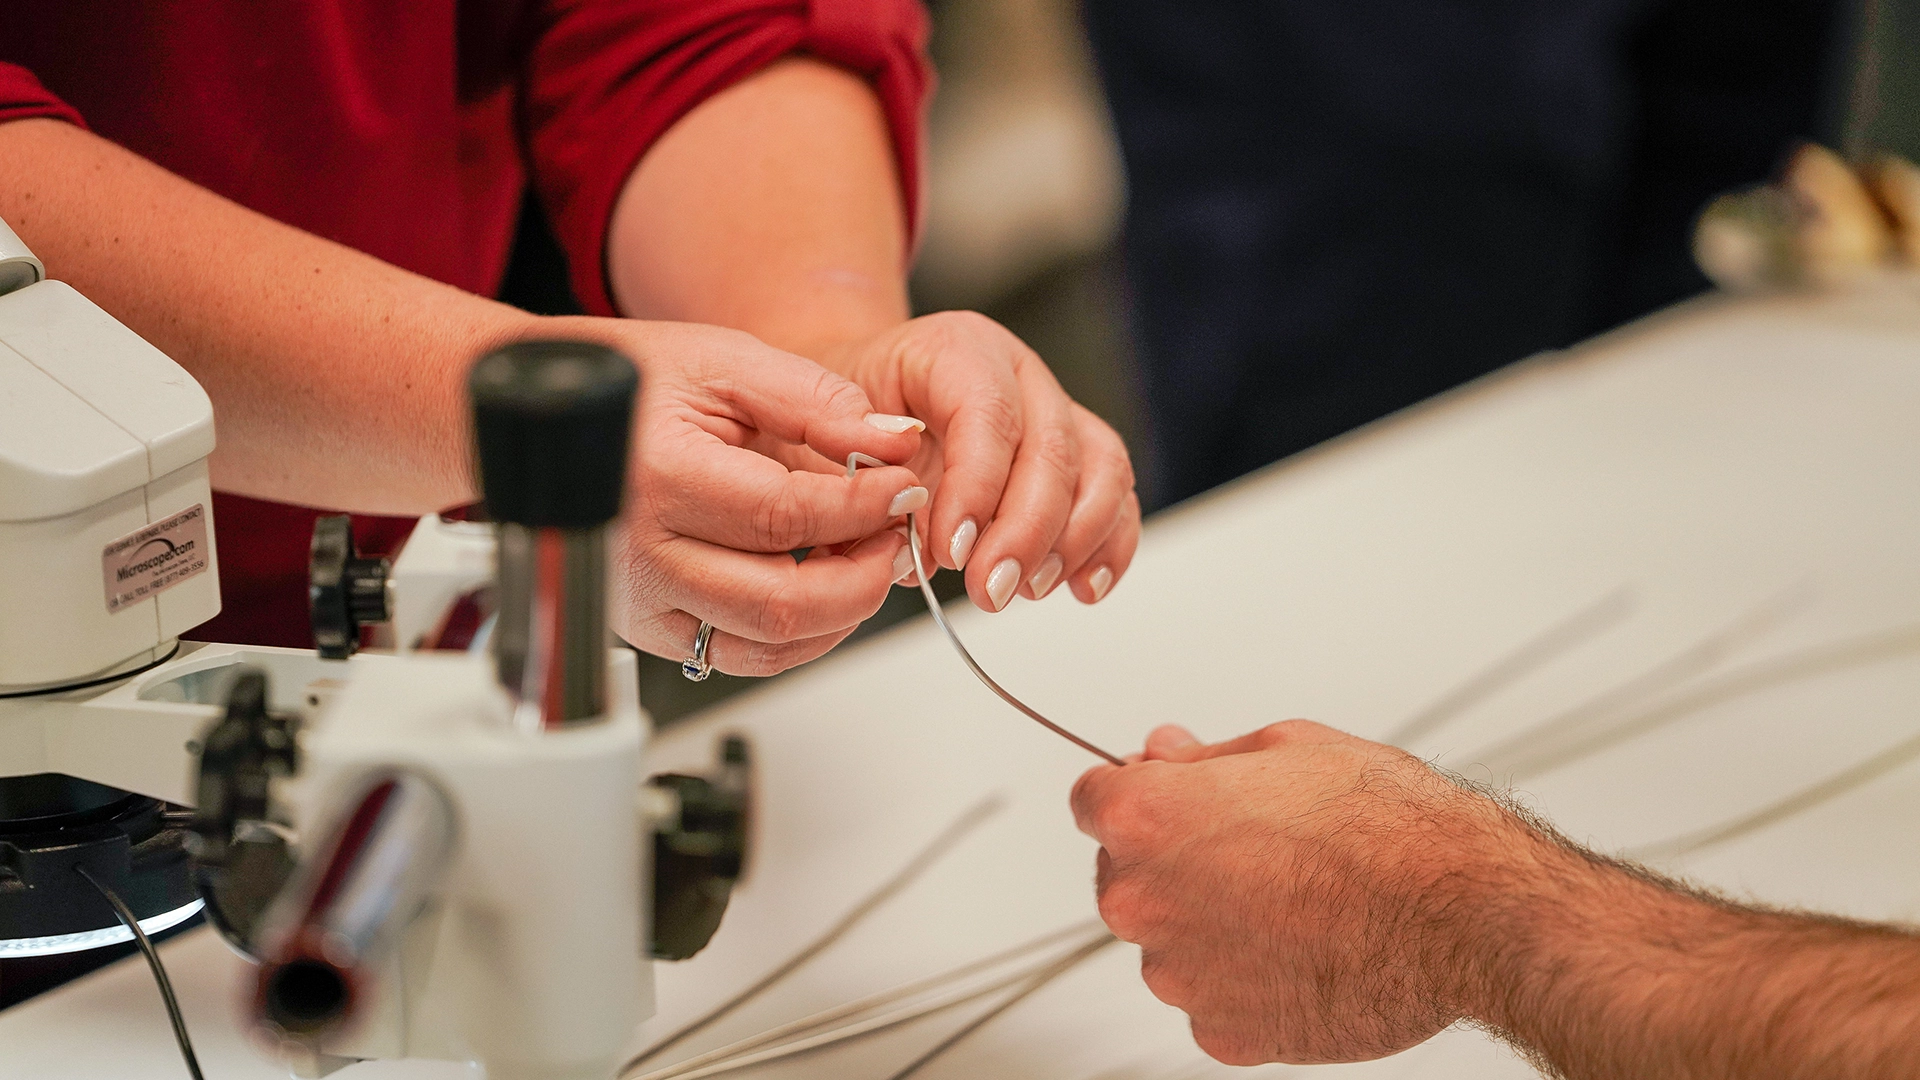 Hands of people engineering a catheter